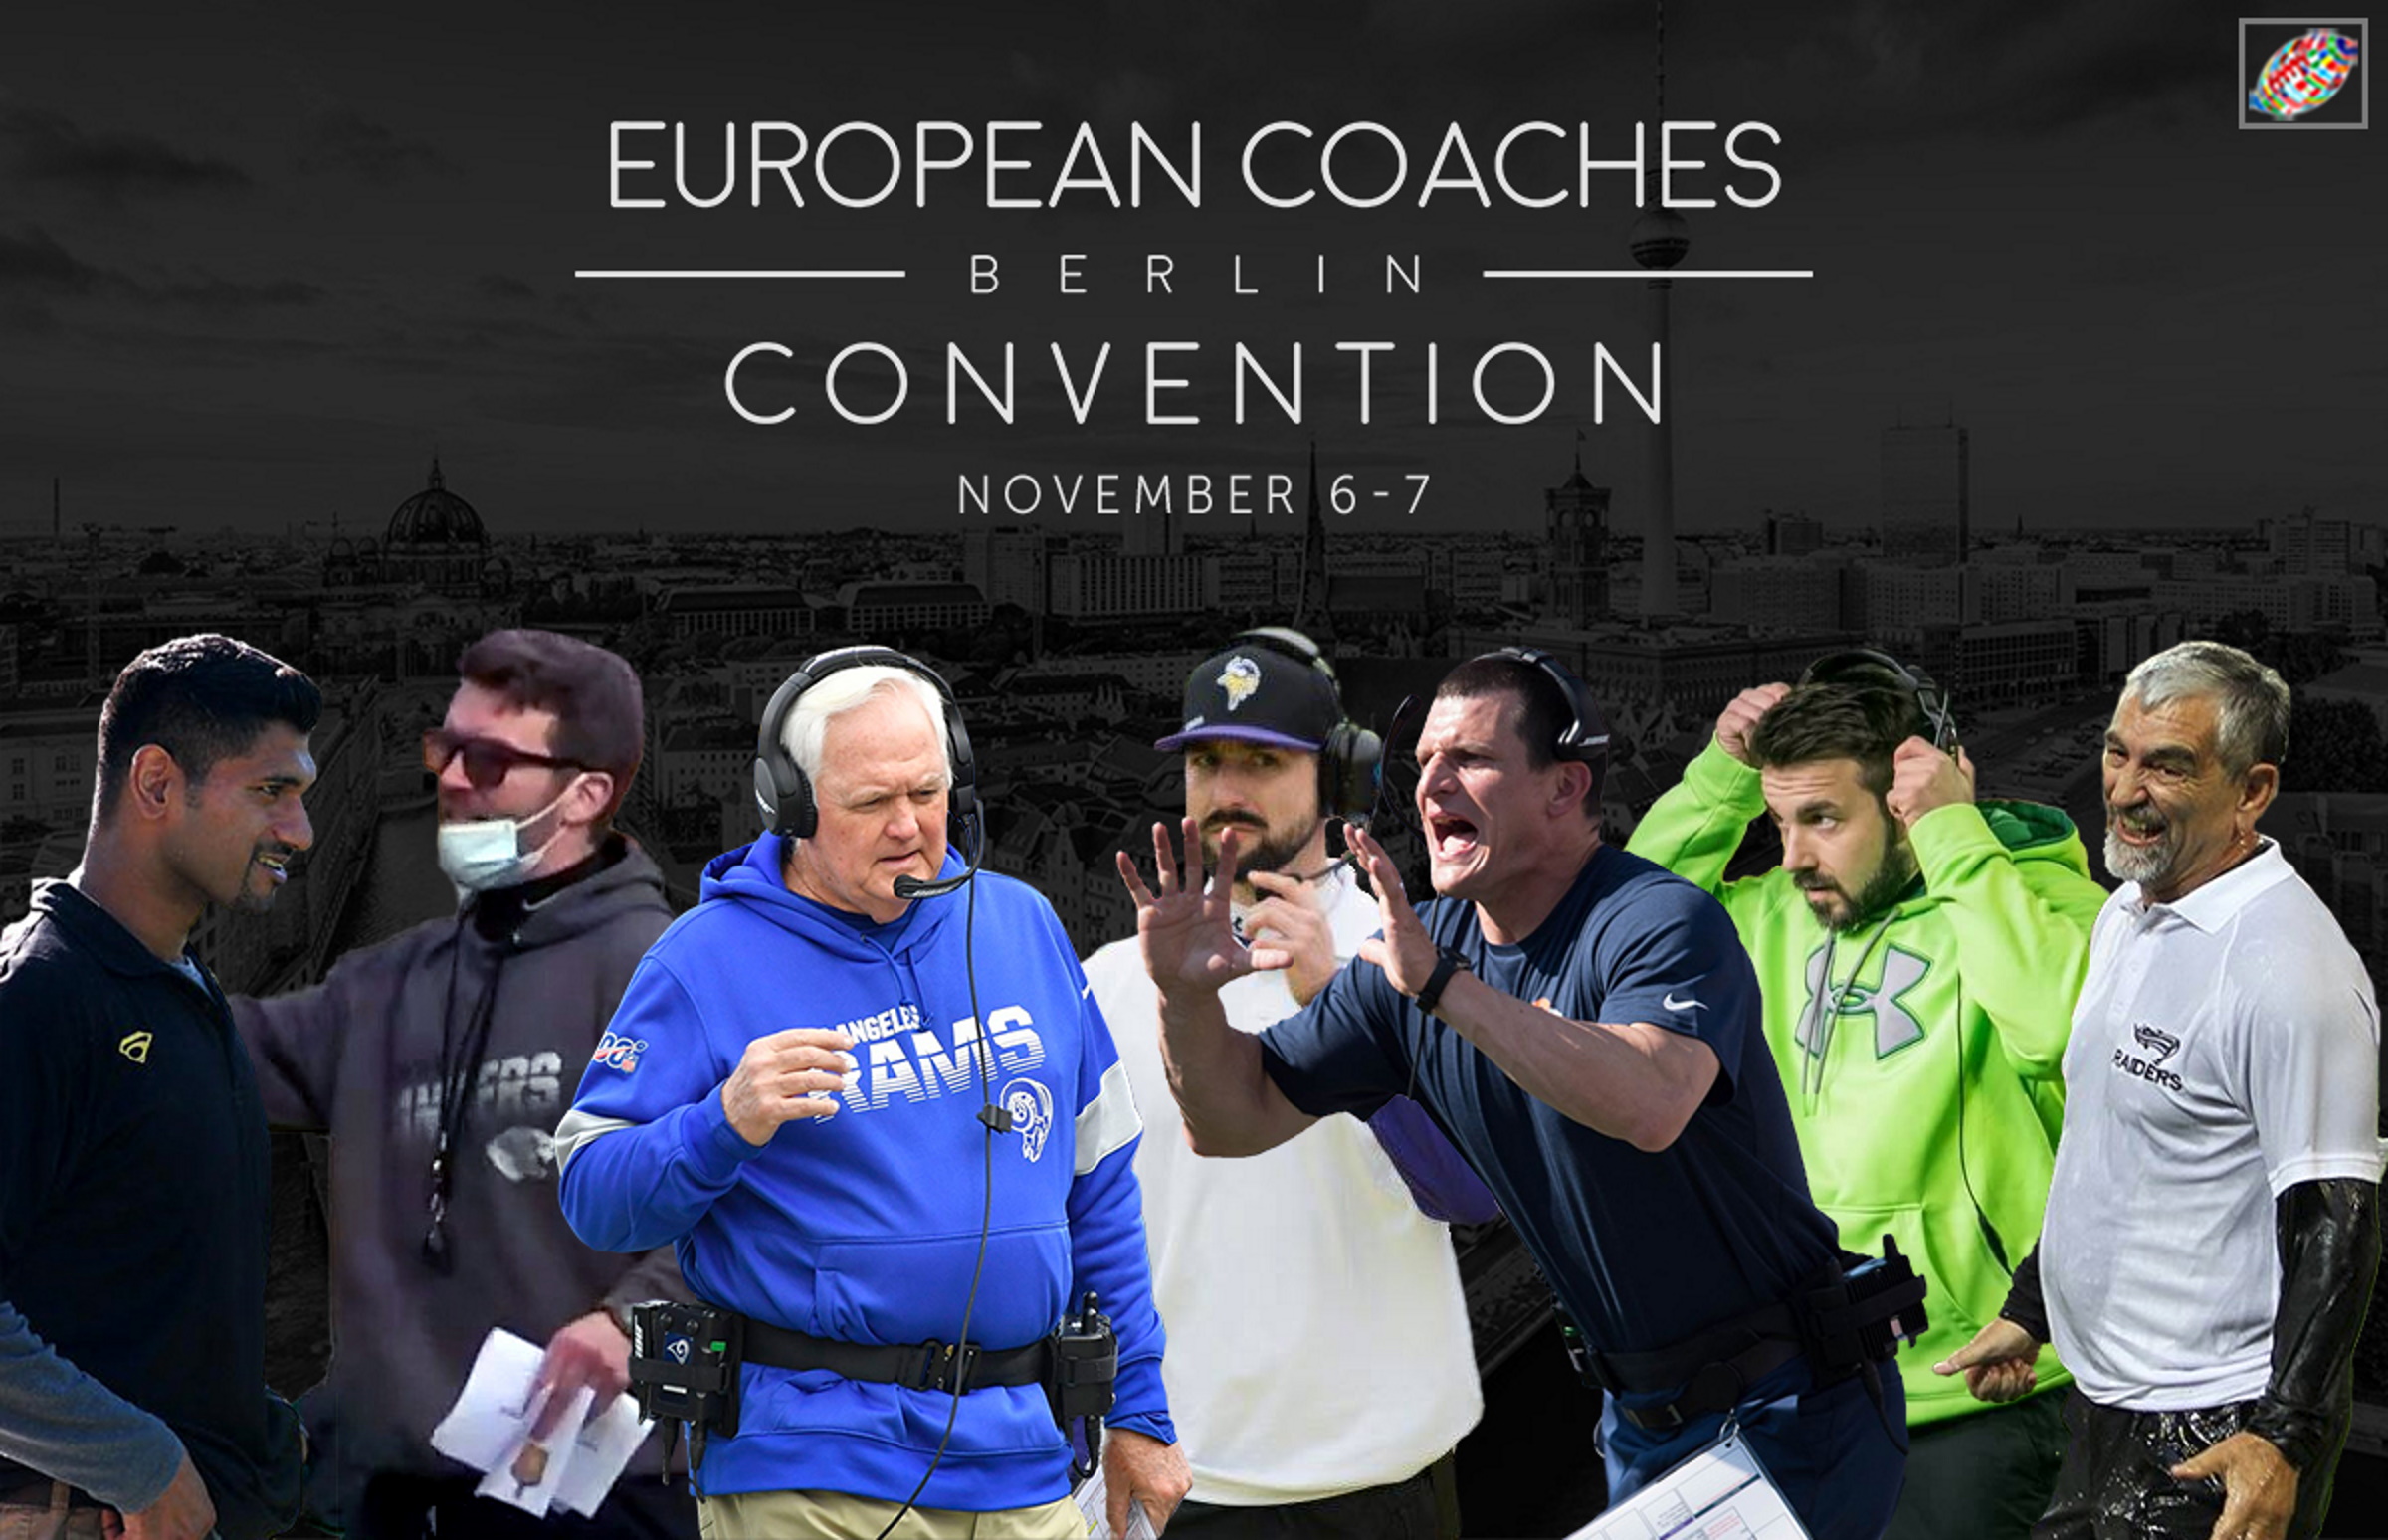 Success of European Coaches Convention key for growth of the game